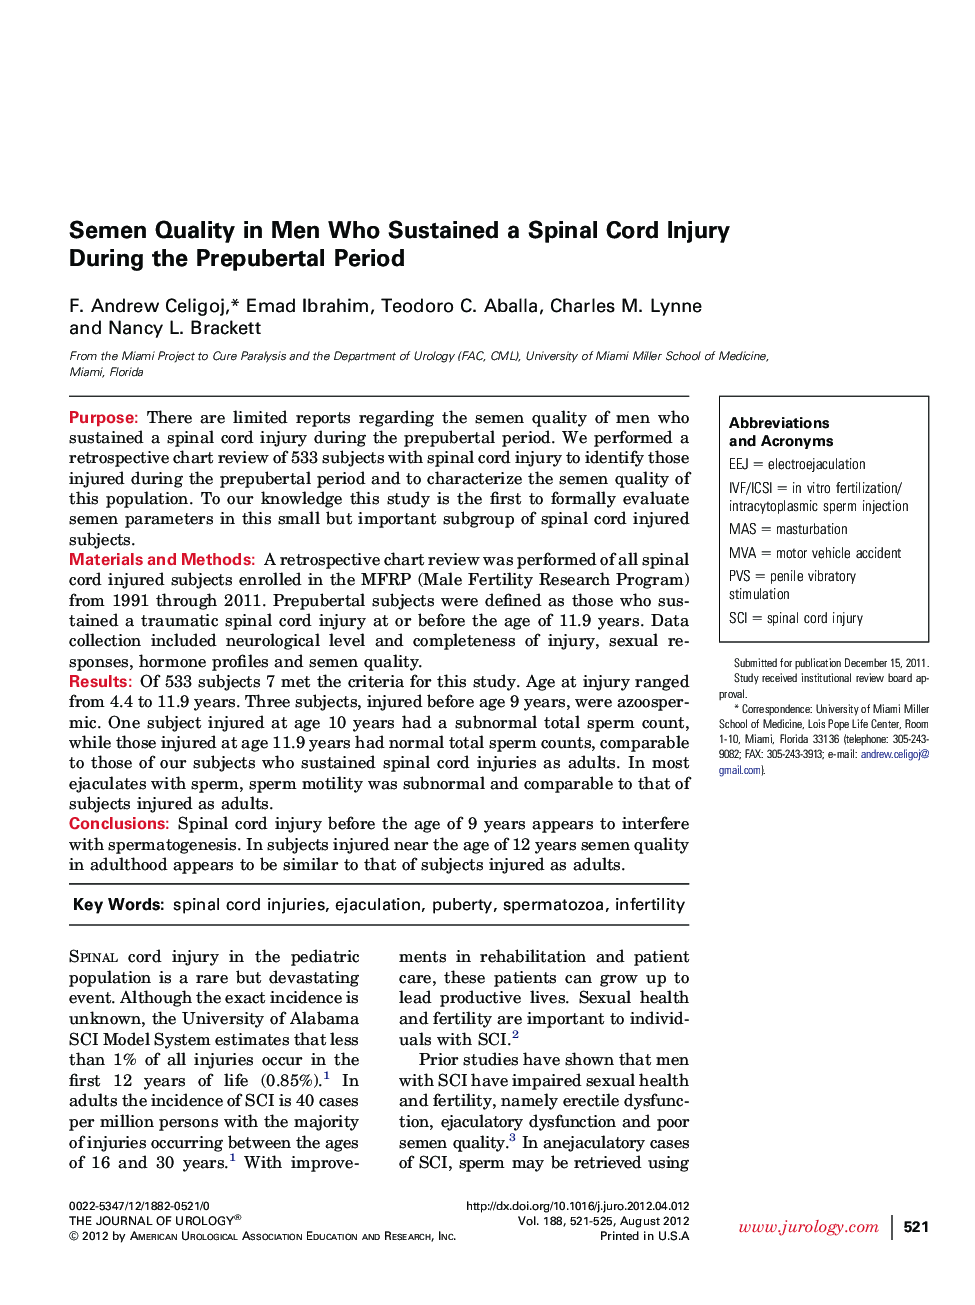 Semen Quality in Men Who Sustained a Spinal Cord Injury During the Prepubertal Period 